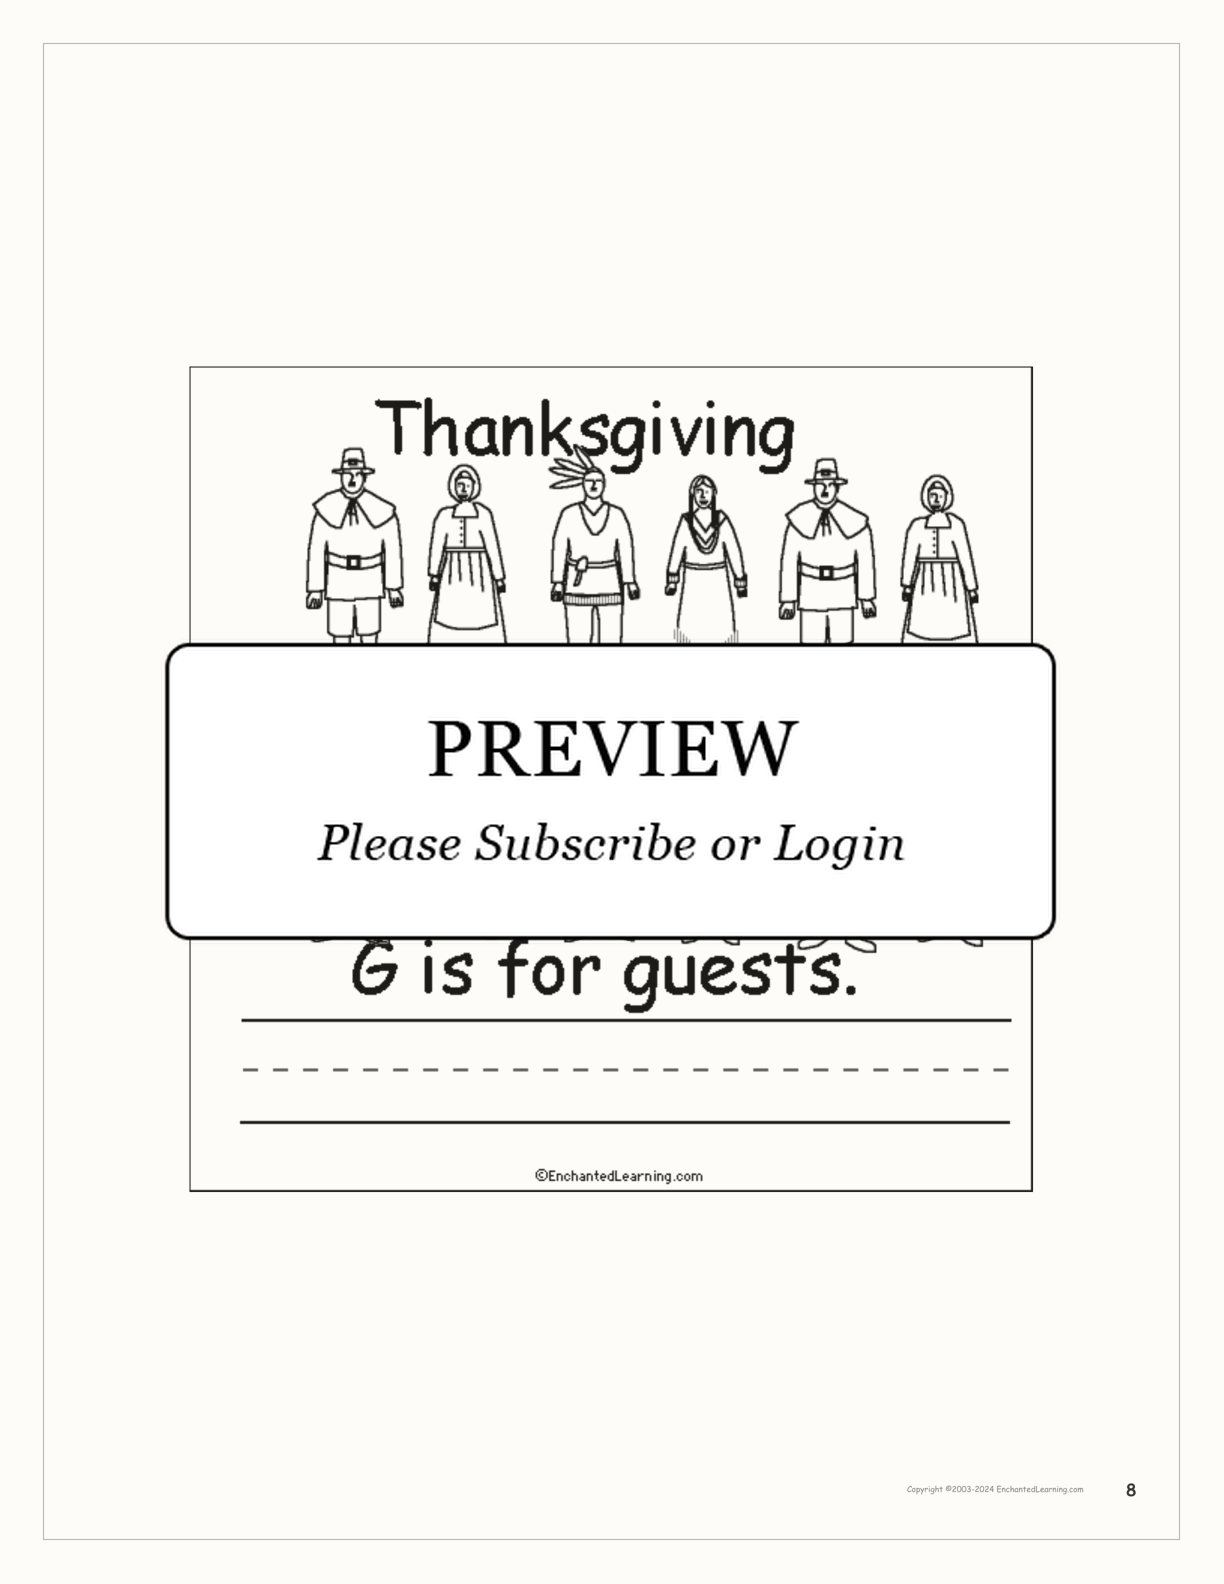 'Thanksgiving is for...' Book for Early Readers interactive printout page 8